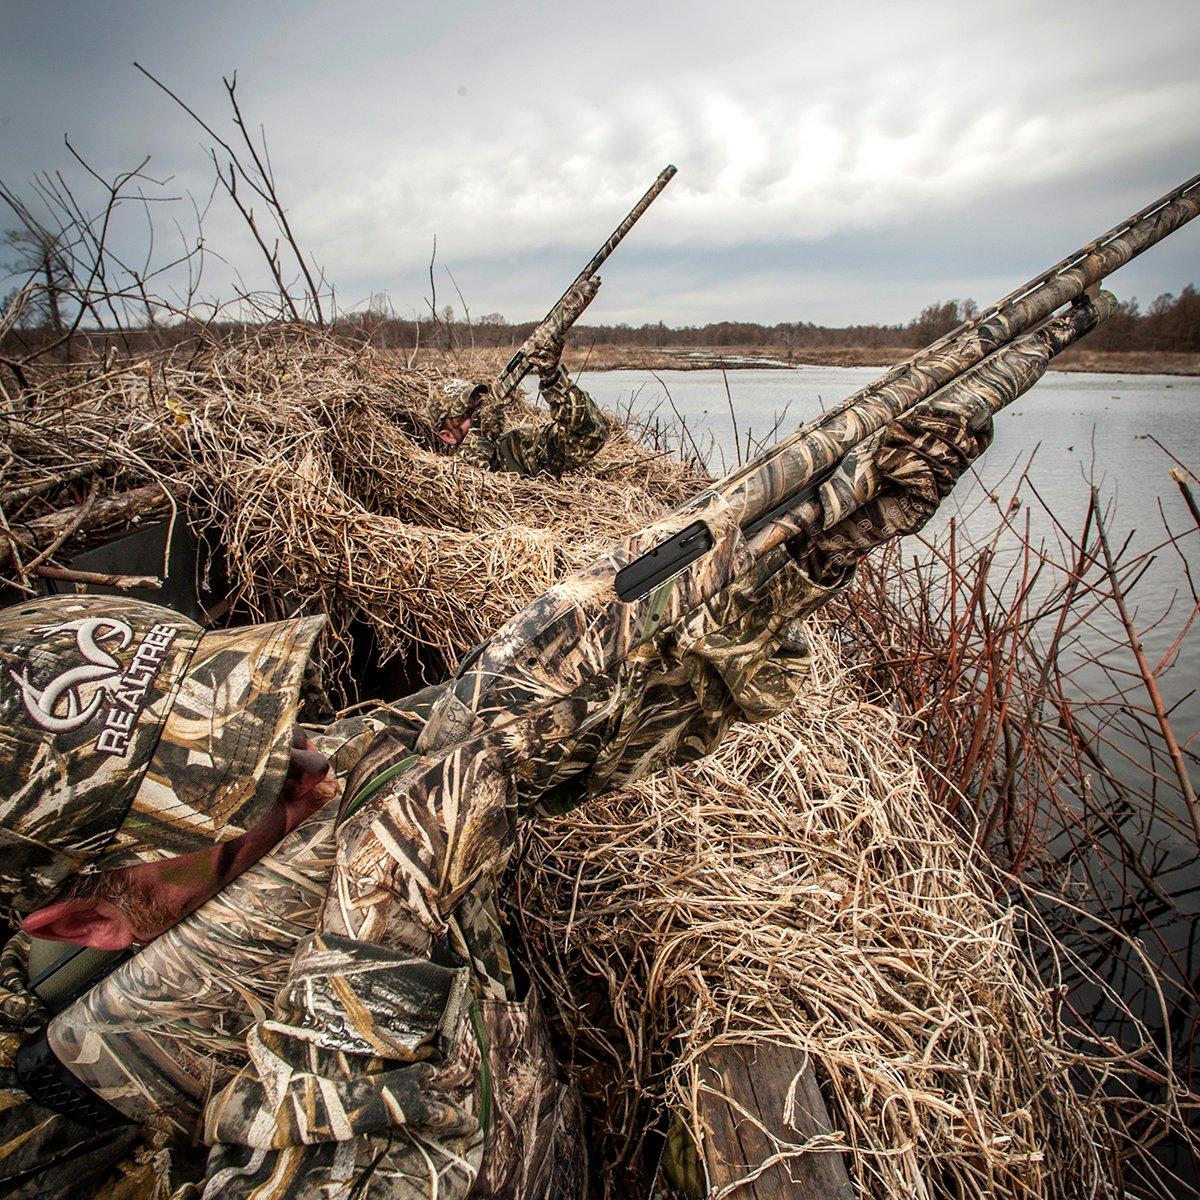 In a crowded blind or pit, your safe zone of fire is 10 o'clock to 2 o'clock and straight above you — no exceptions. Photo © Realtree